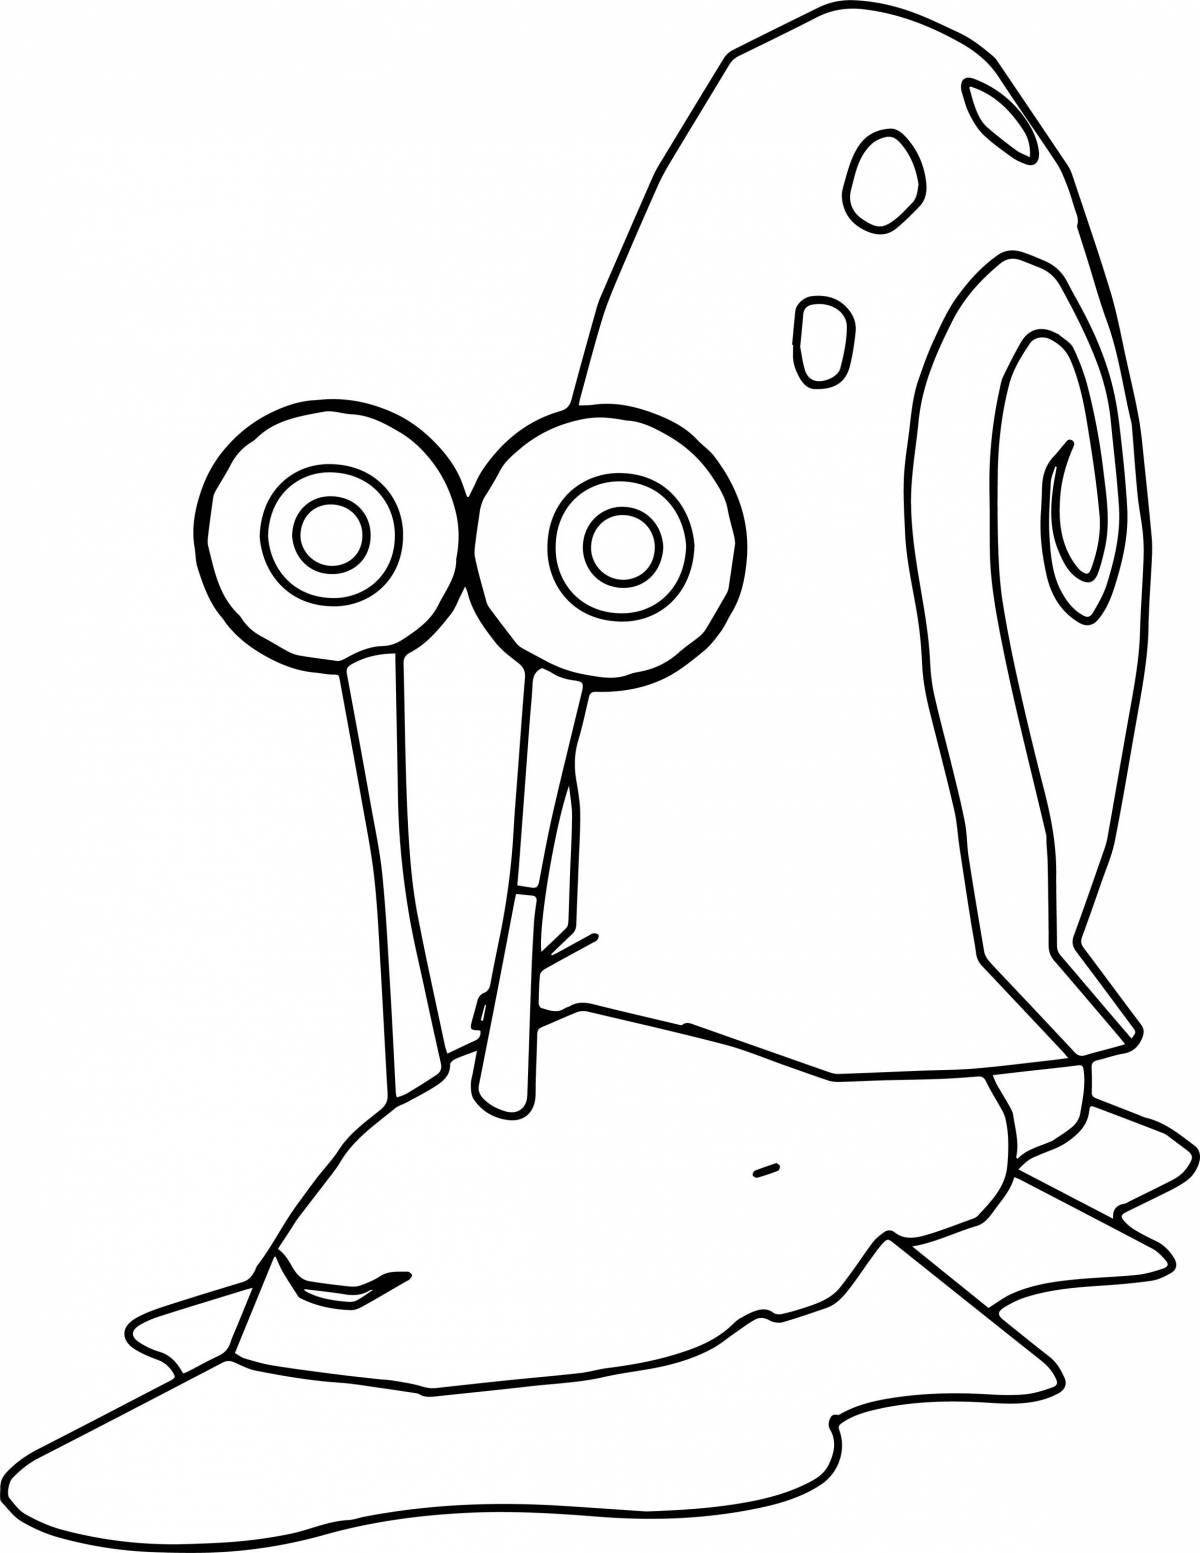 Coloring page with bright gary